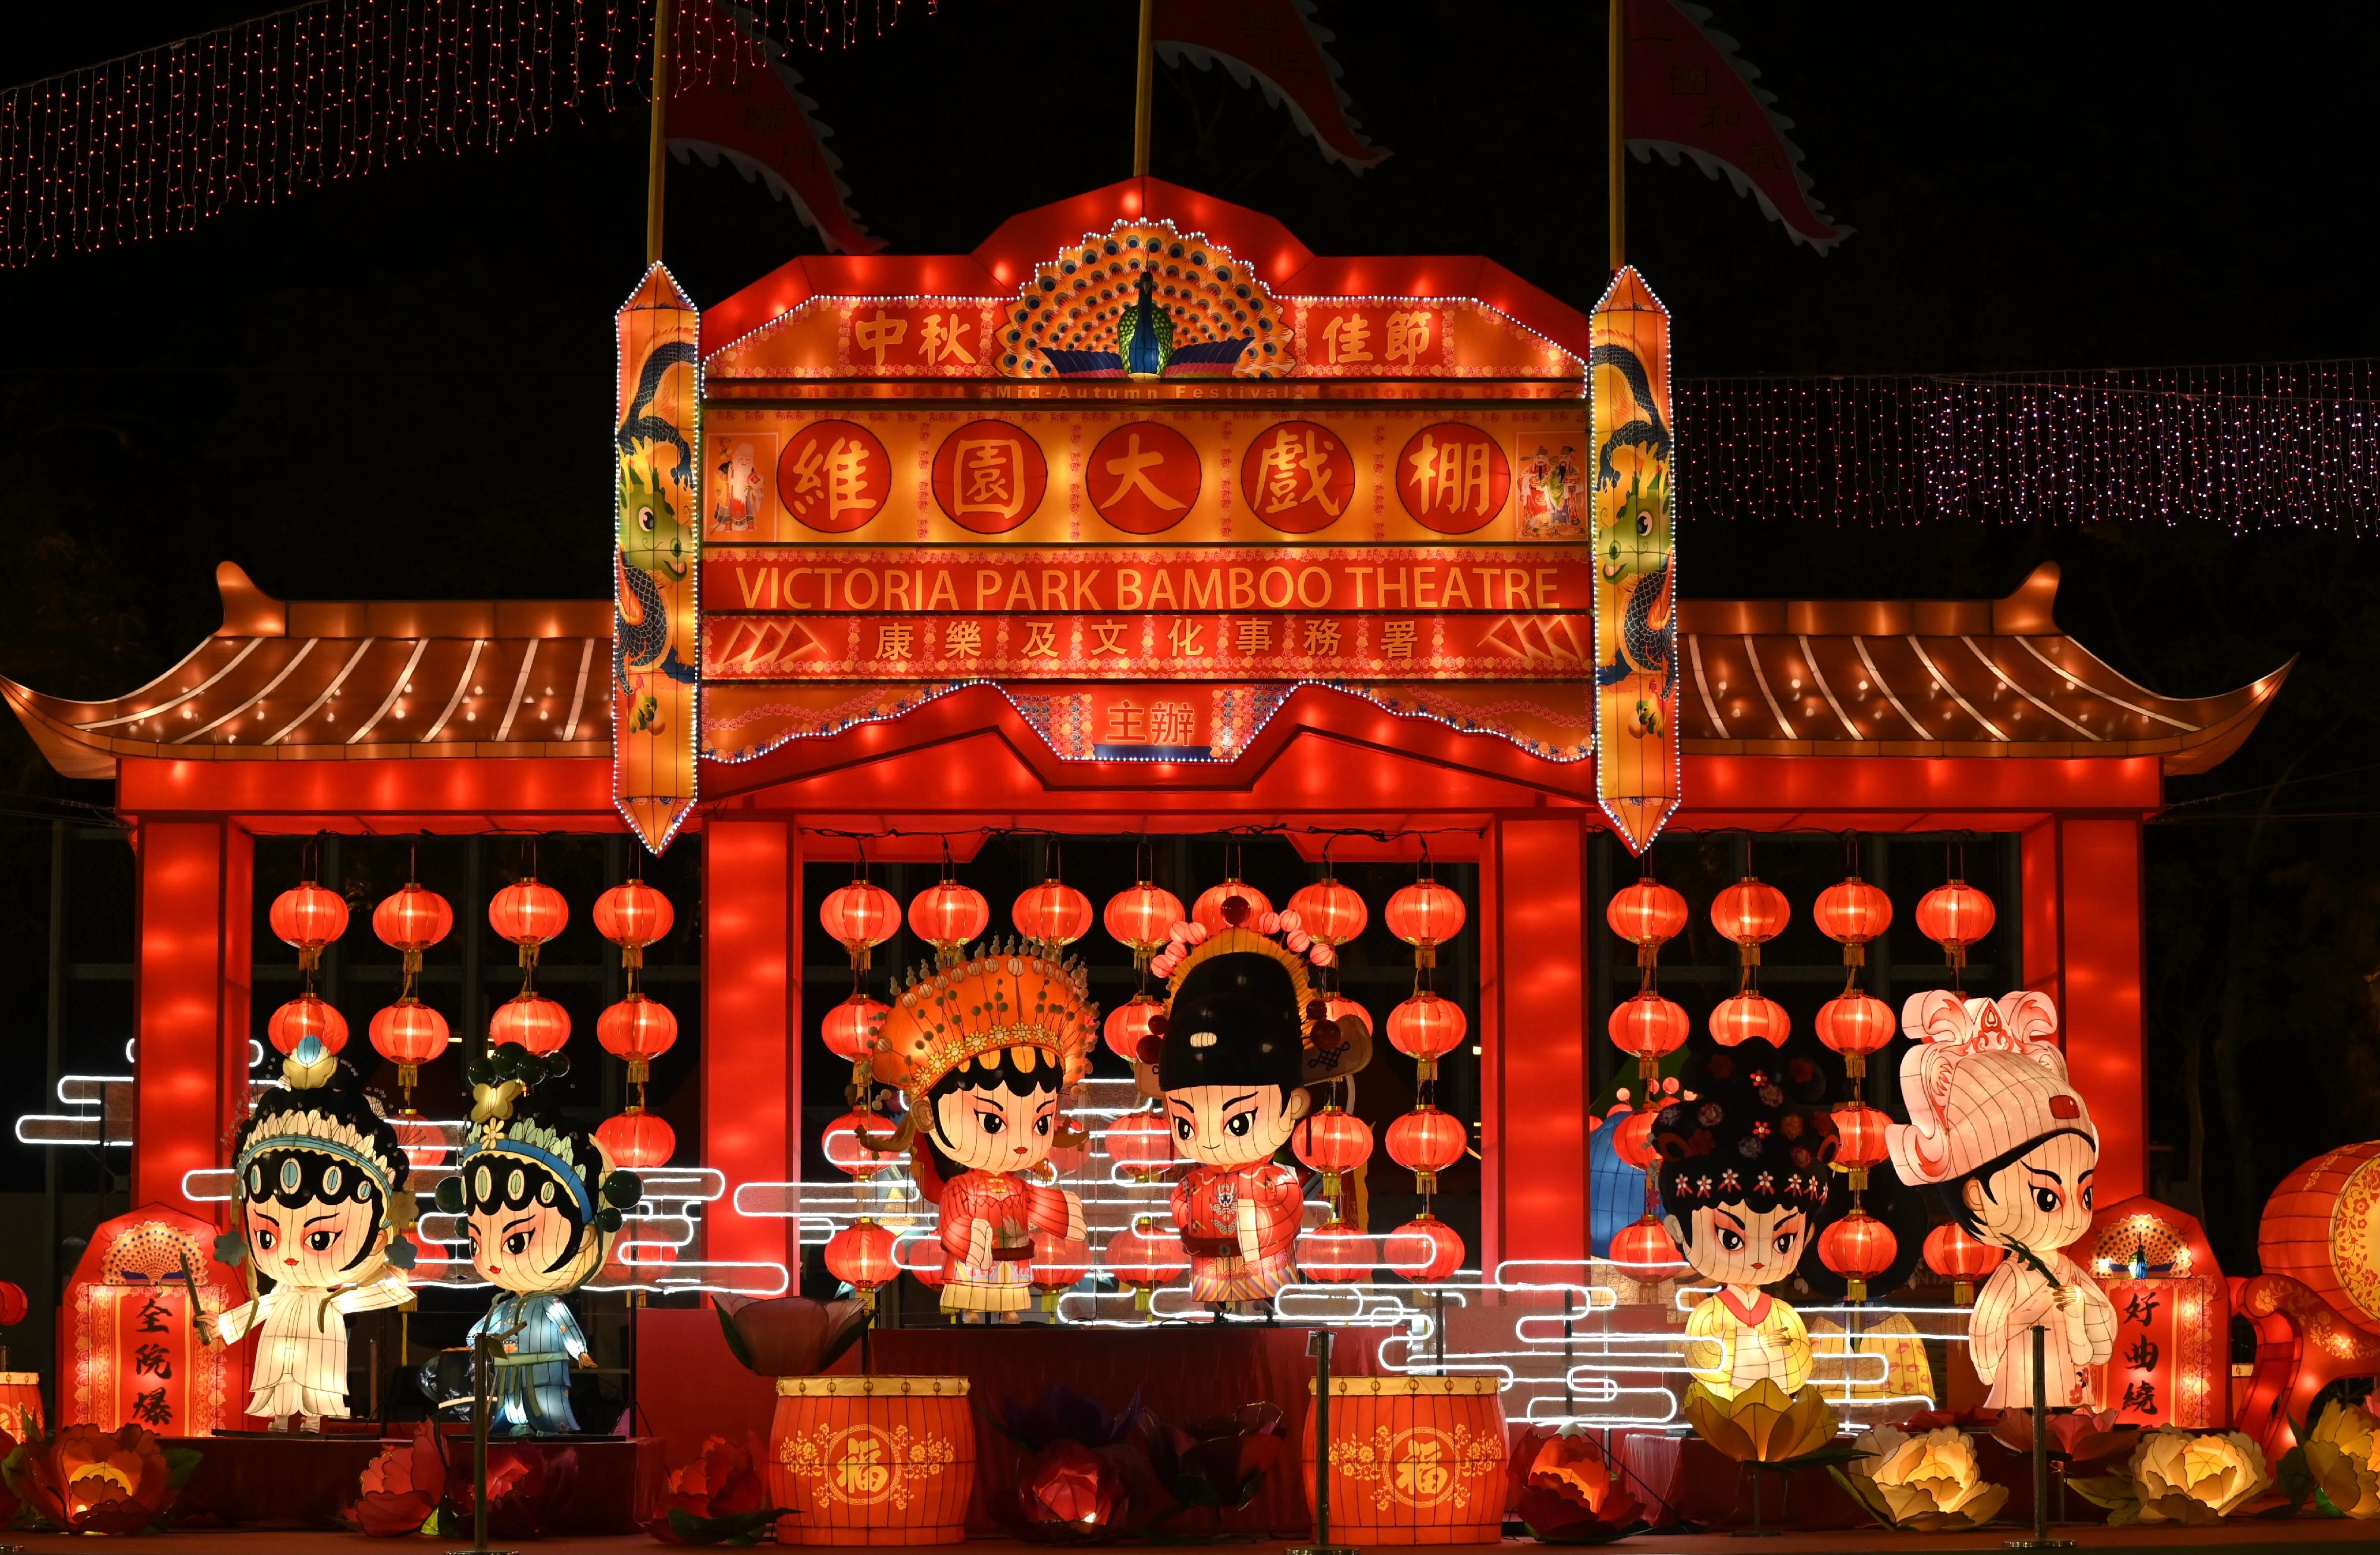 The Leisure and Cultural Services Department will showcase spectacular lantern displays of different themes at the Mid-Autumn Lantern Carnivals in Victoria Park, Sha Tin Park and Tuen Mun Park from tomorrow (September 23) until October 2. A vast range of activities will also be organised in the three parks at different dates. Photo shows a large-scale lantern set on Cantonese opera and in the shape of a floral board found in bamboo shed theatres at Victoria Park.